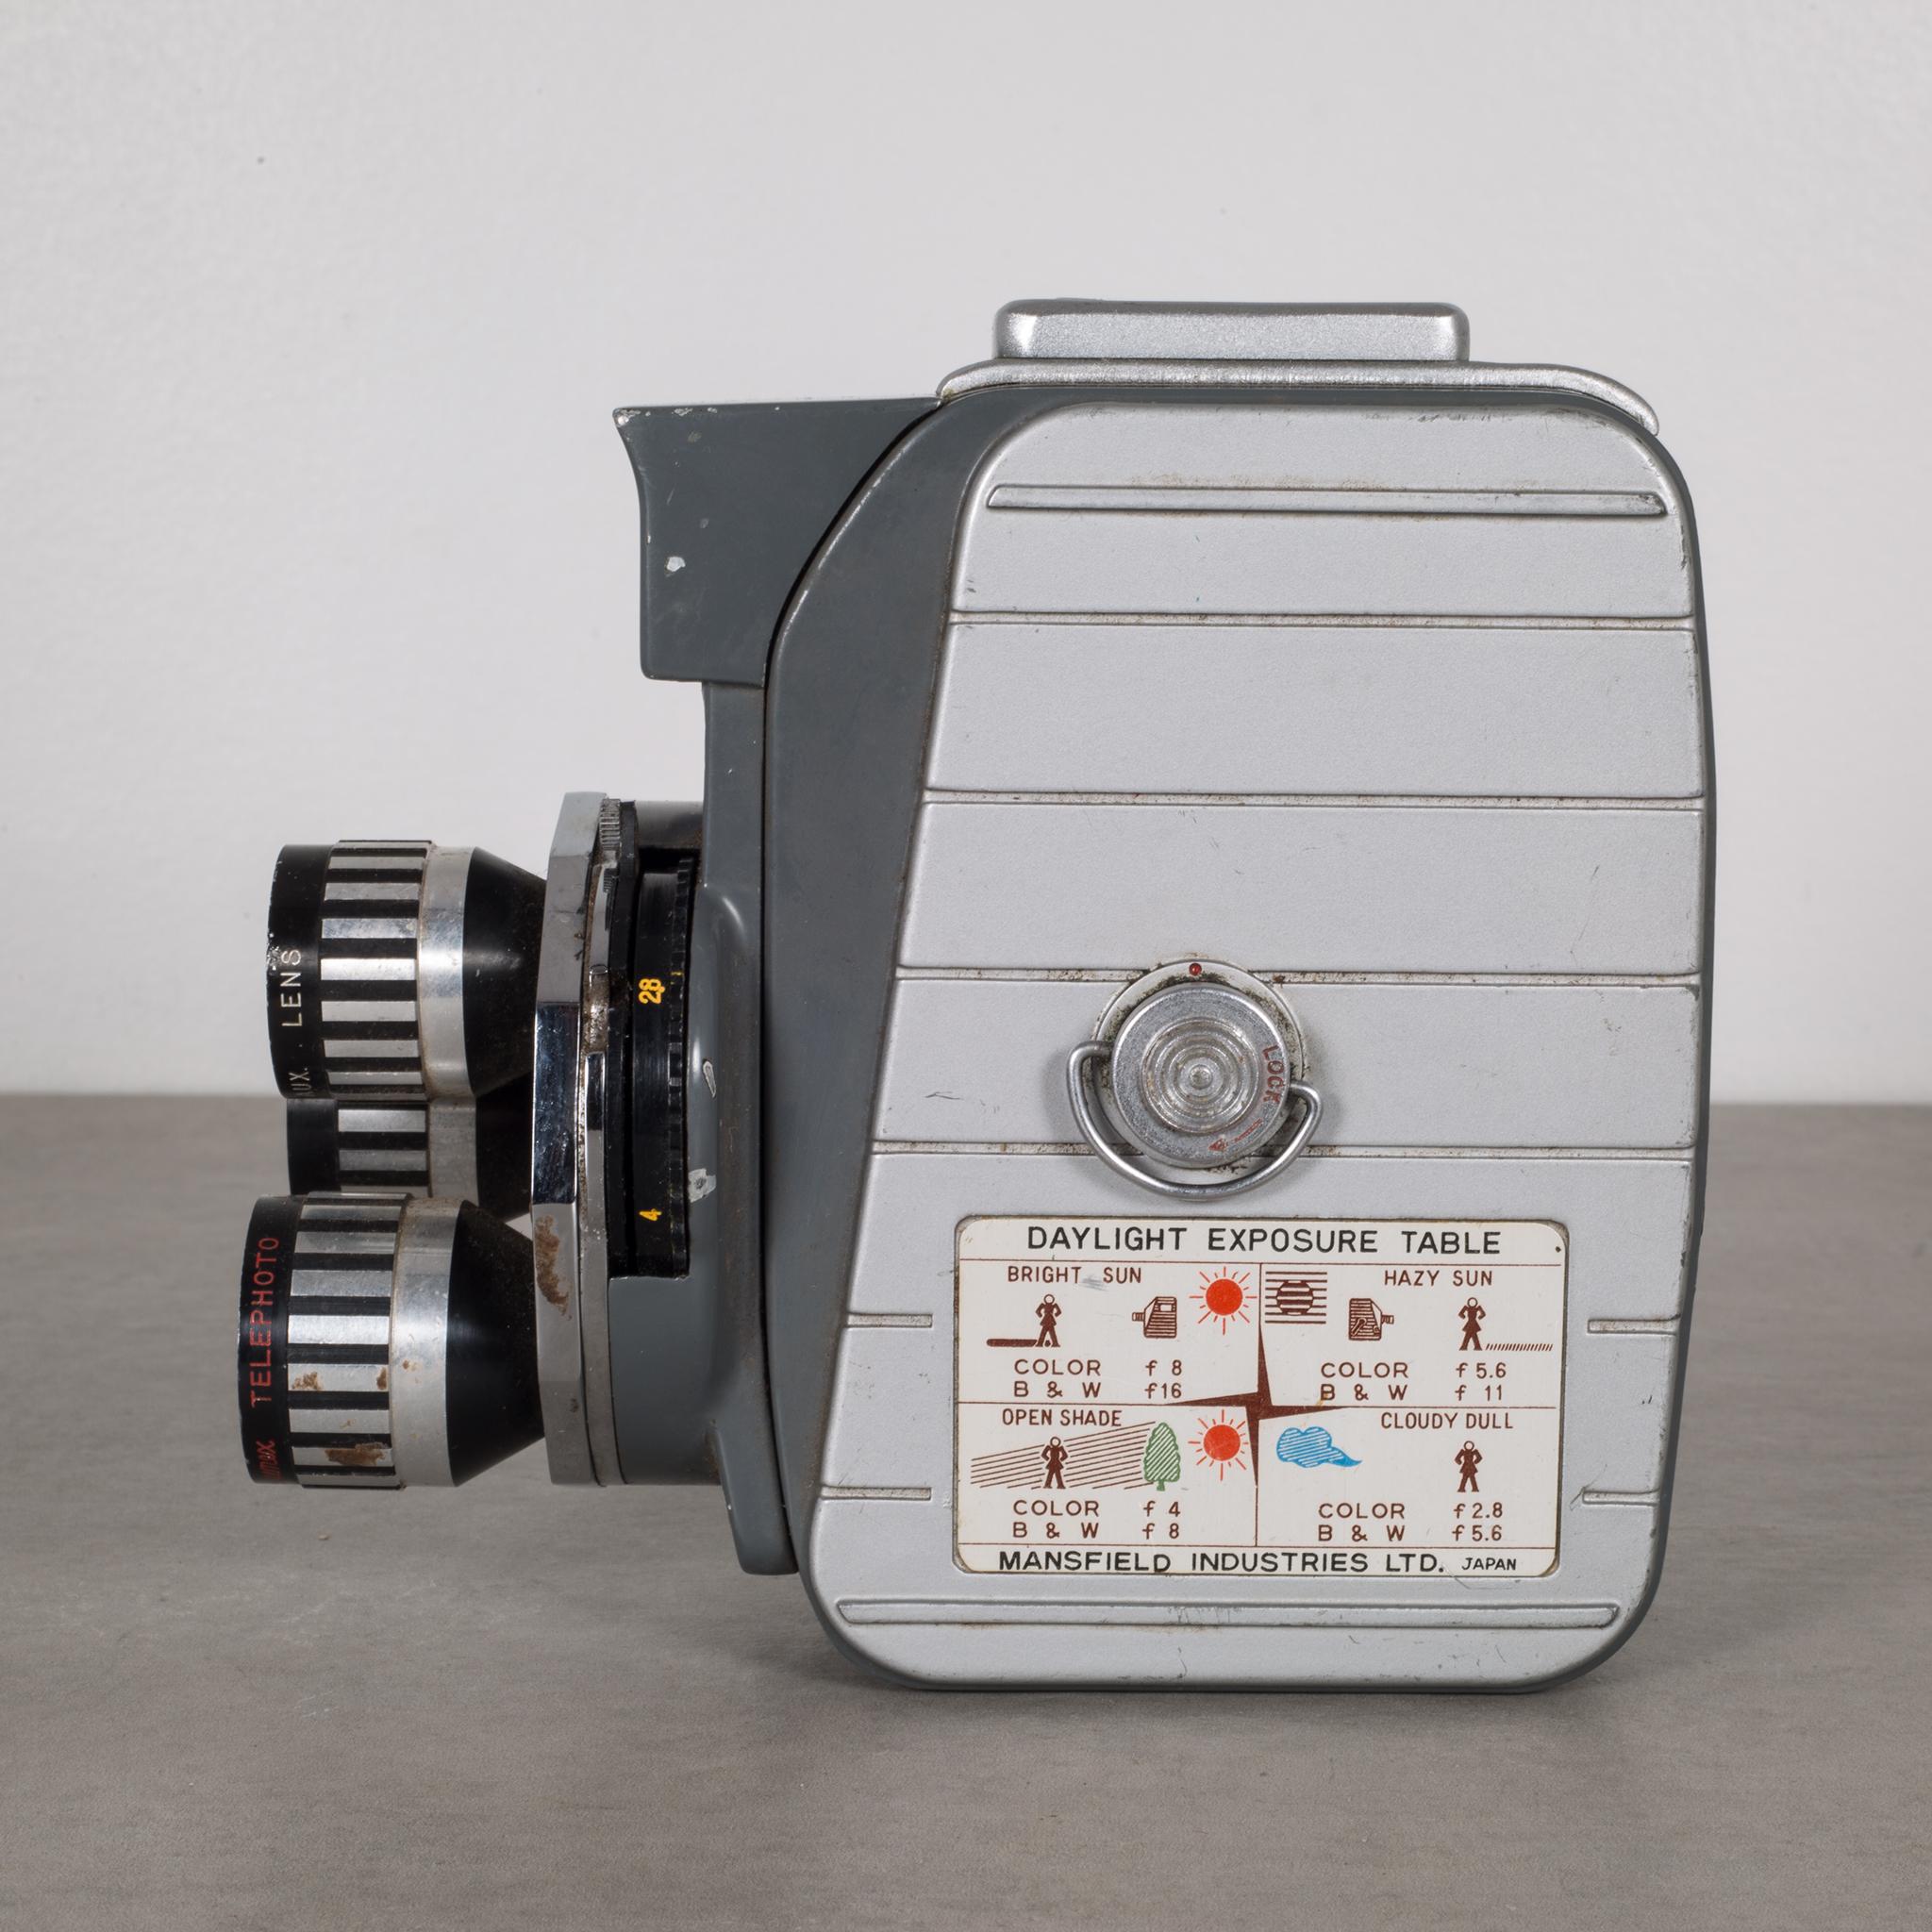 About:

This is an original Holiday ll 8mm film camera. The body is all metal with a glass meter on top. The lens rotate and the arm on the side winds. This piece has retained its original finish with minimal structural damage. The camera may or